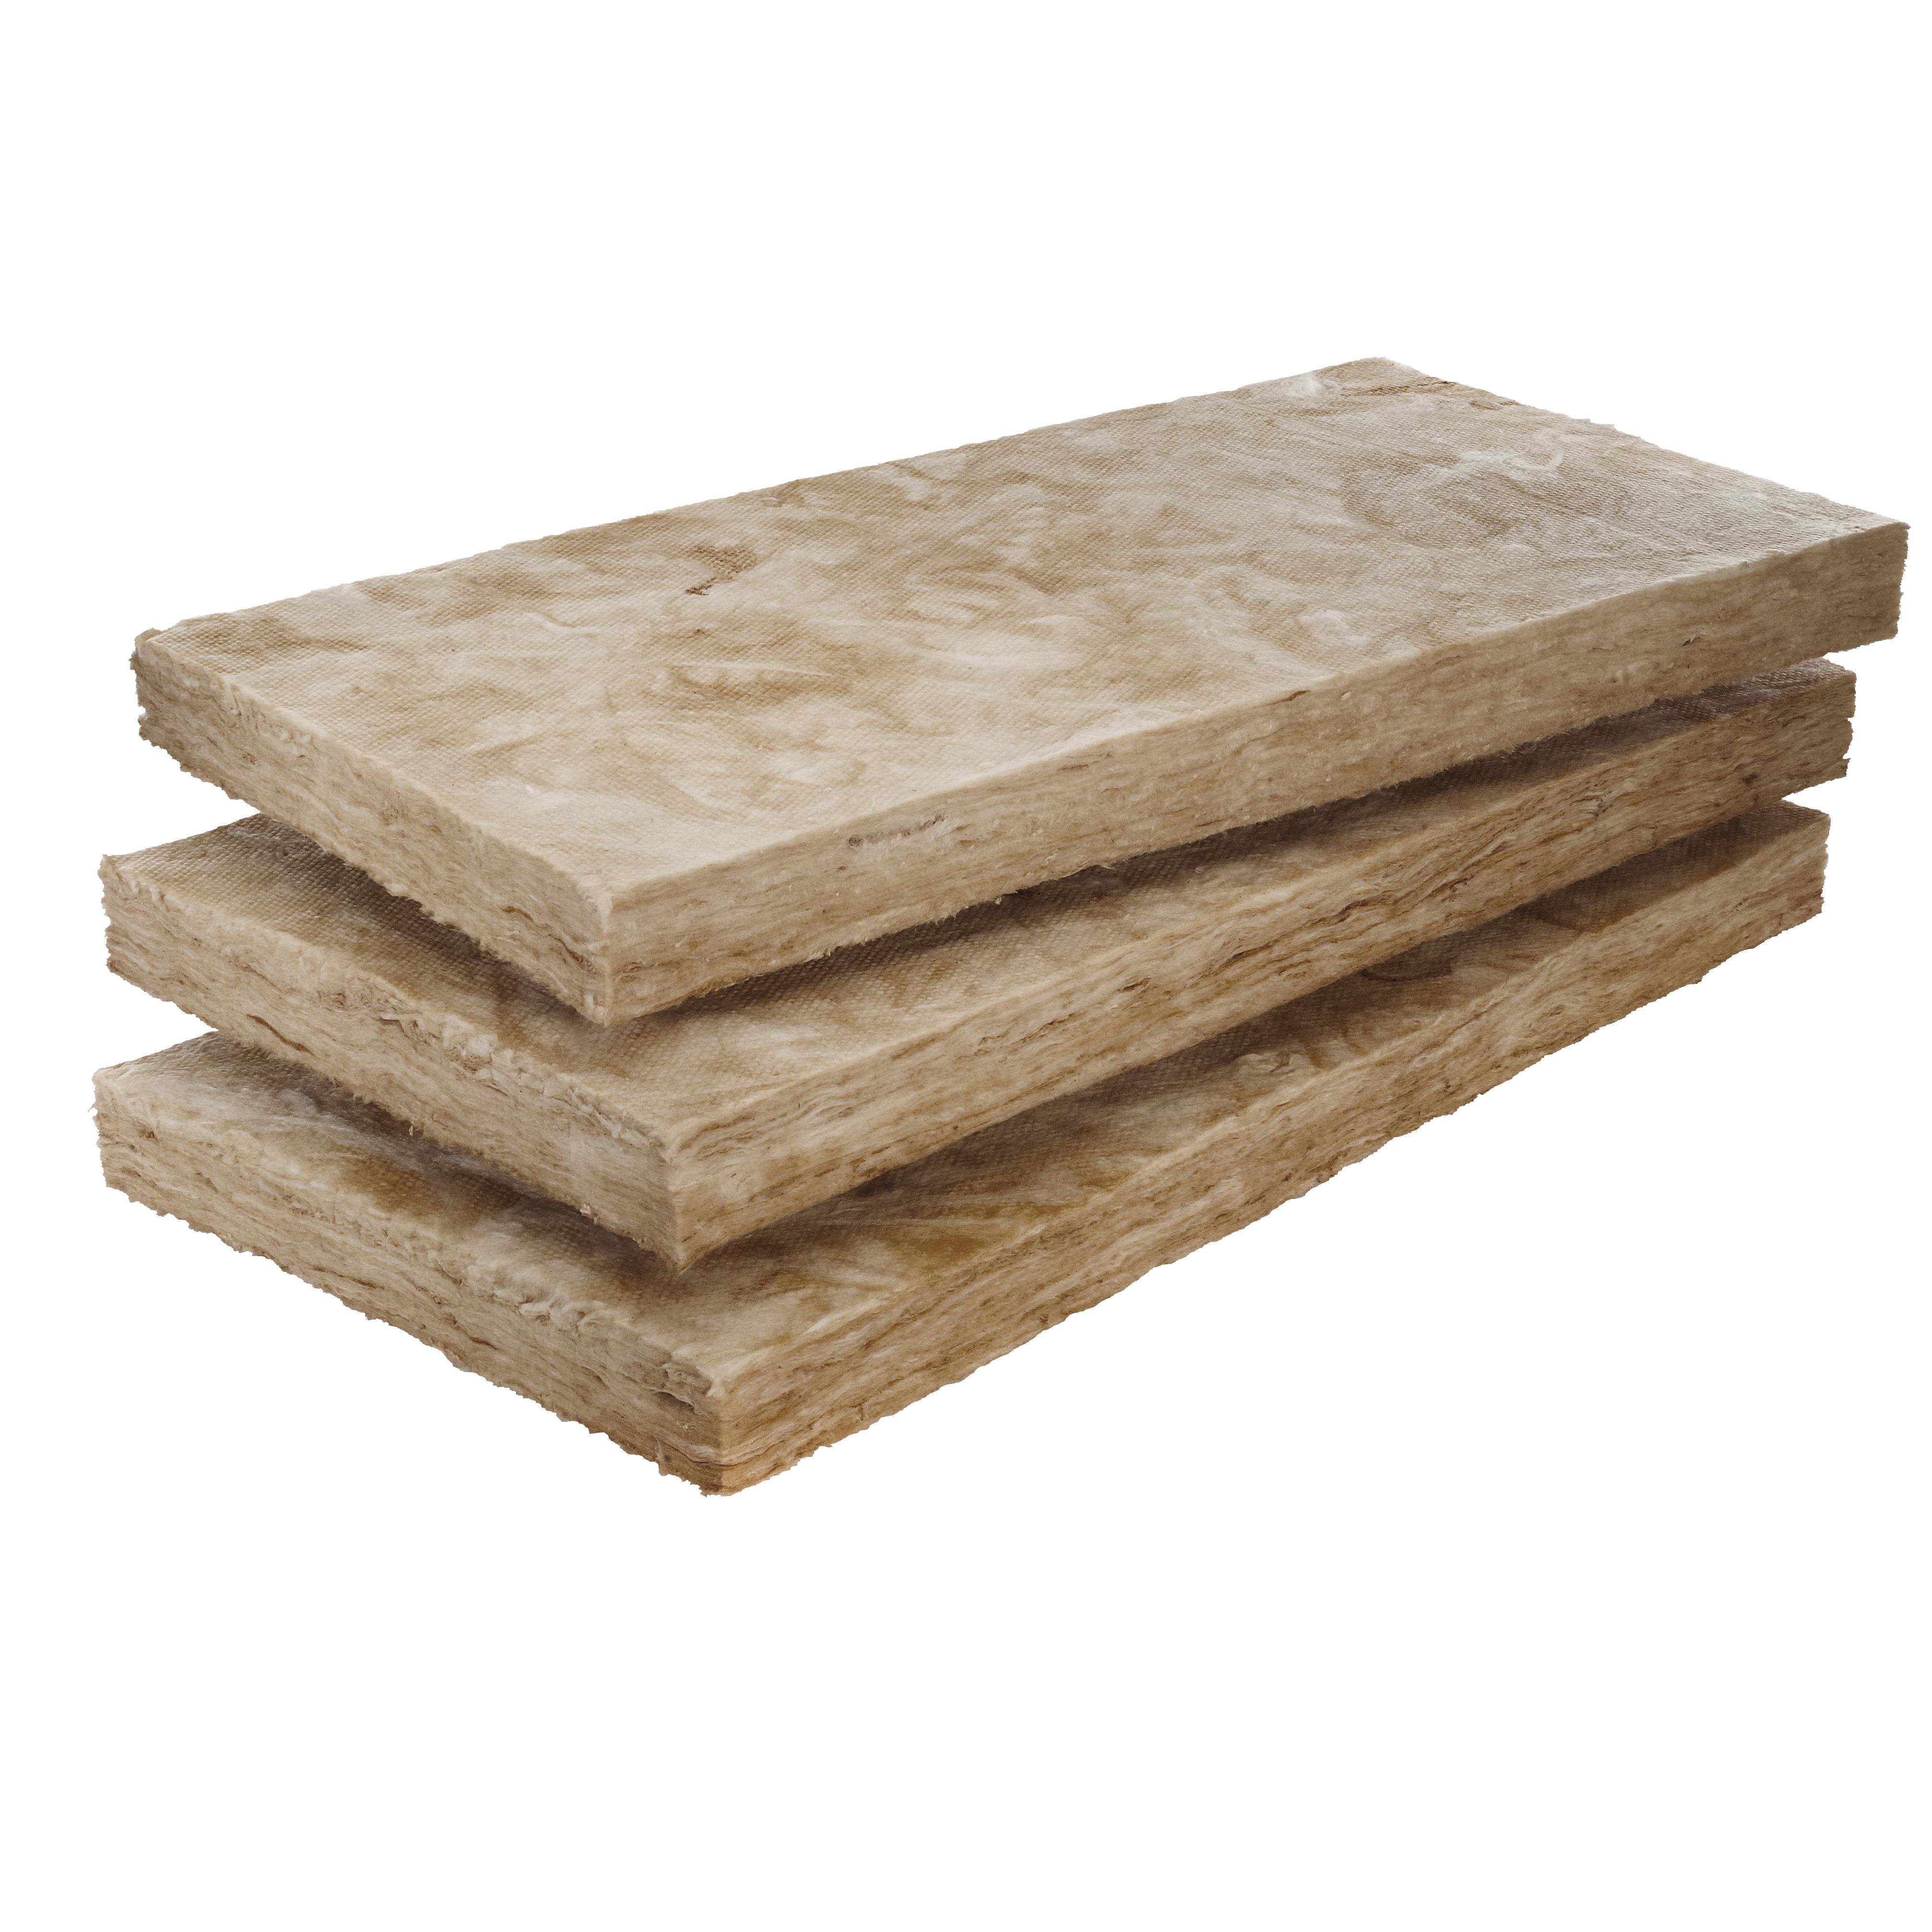 Knauf Dritherm Glasswool 100mm Insulation board (L)1.2m (W)0.46m, Pack of 6